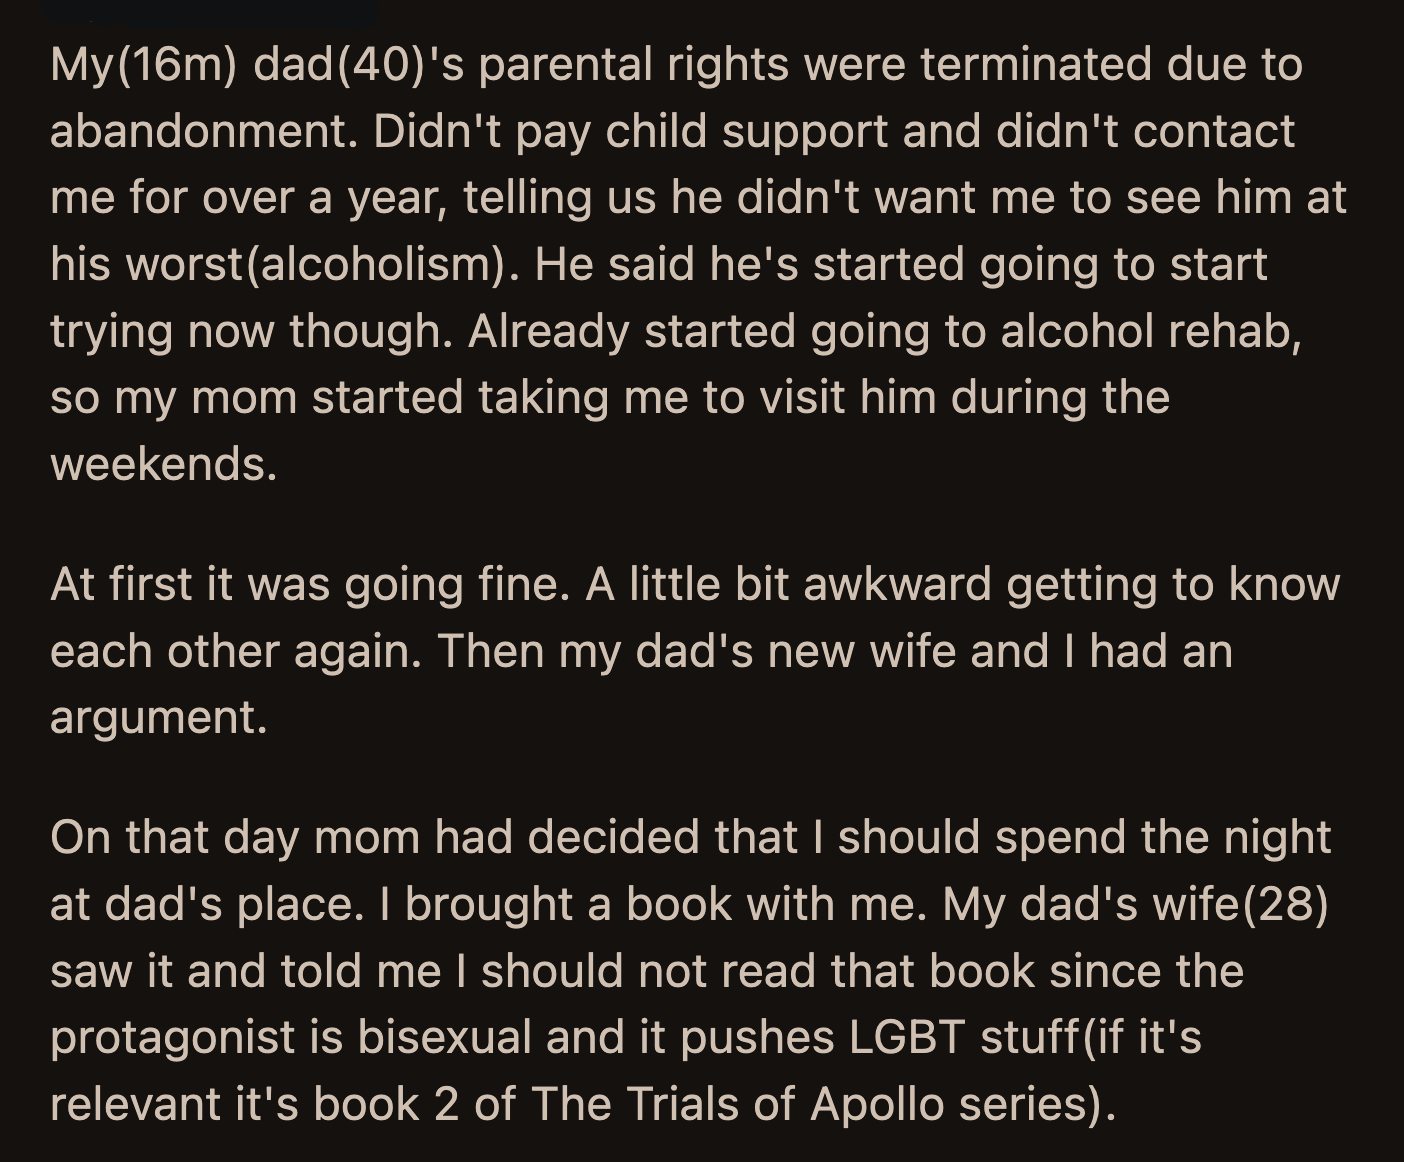 His mom reassured OP that he didn't have to go to his dad's house again if he was uncomfortable.